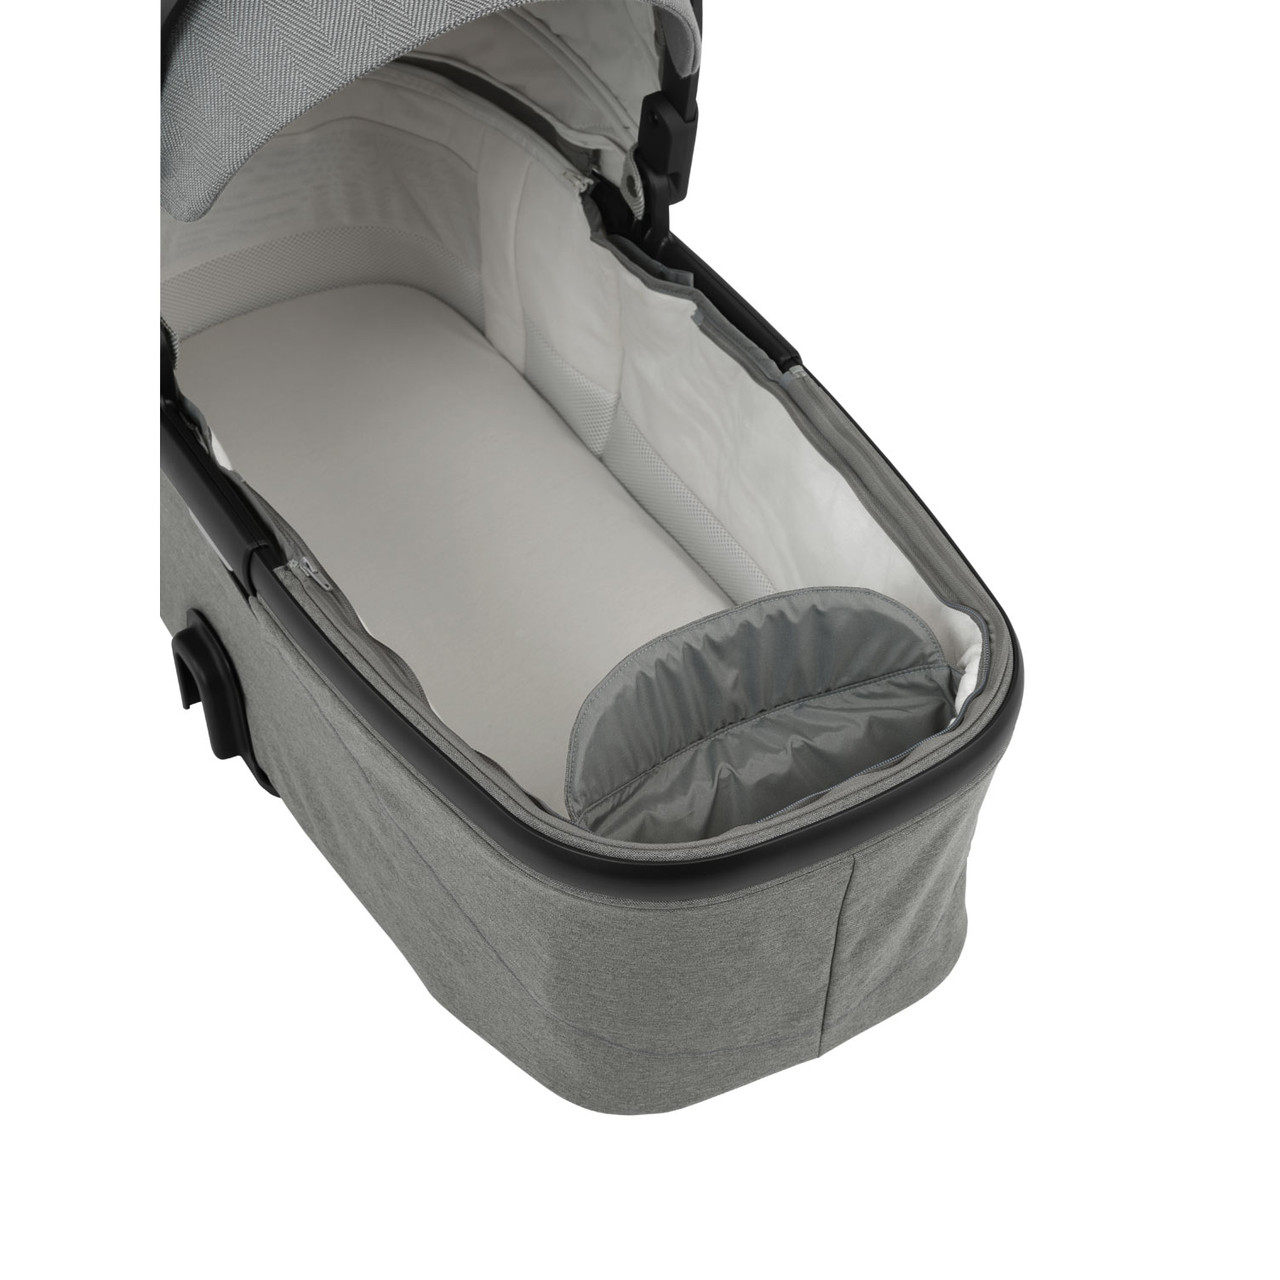 Nuna Demi Grow Bassinet: Features and Benefits Unveiled缩略图